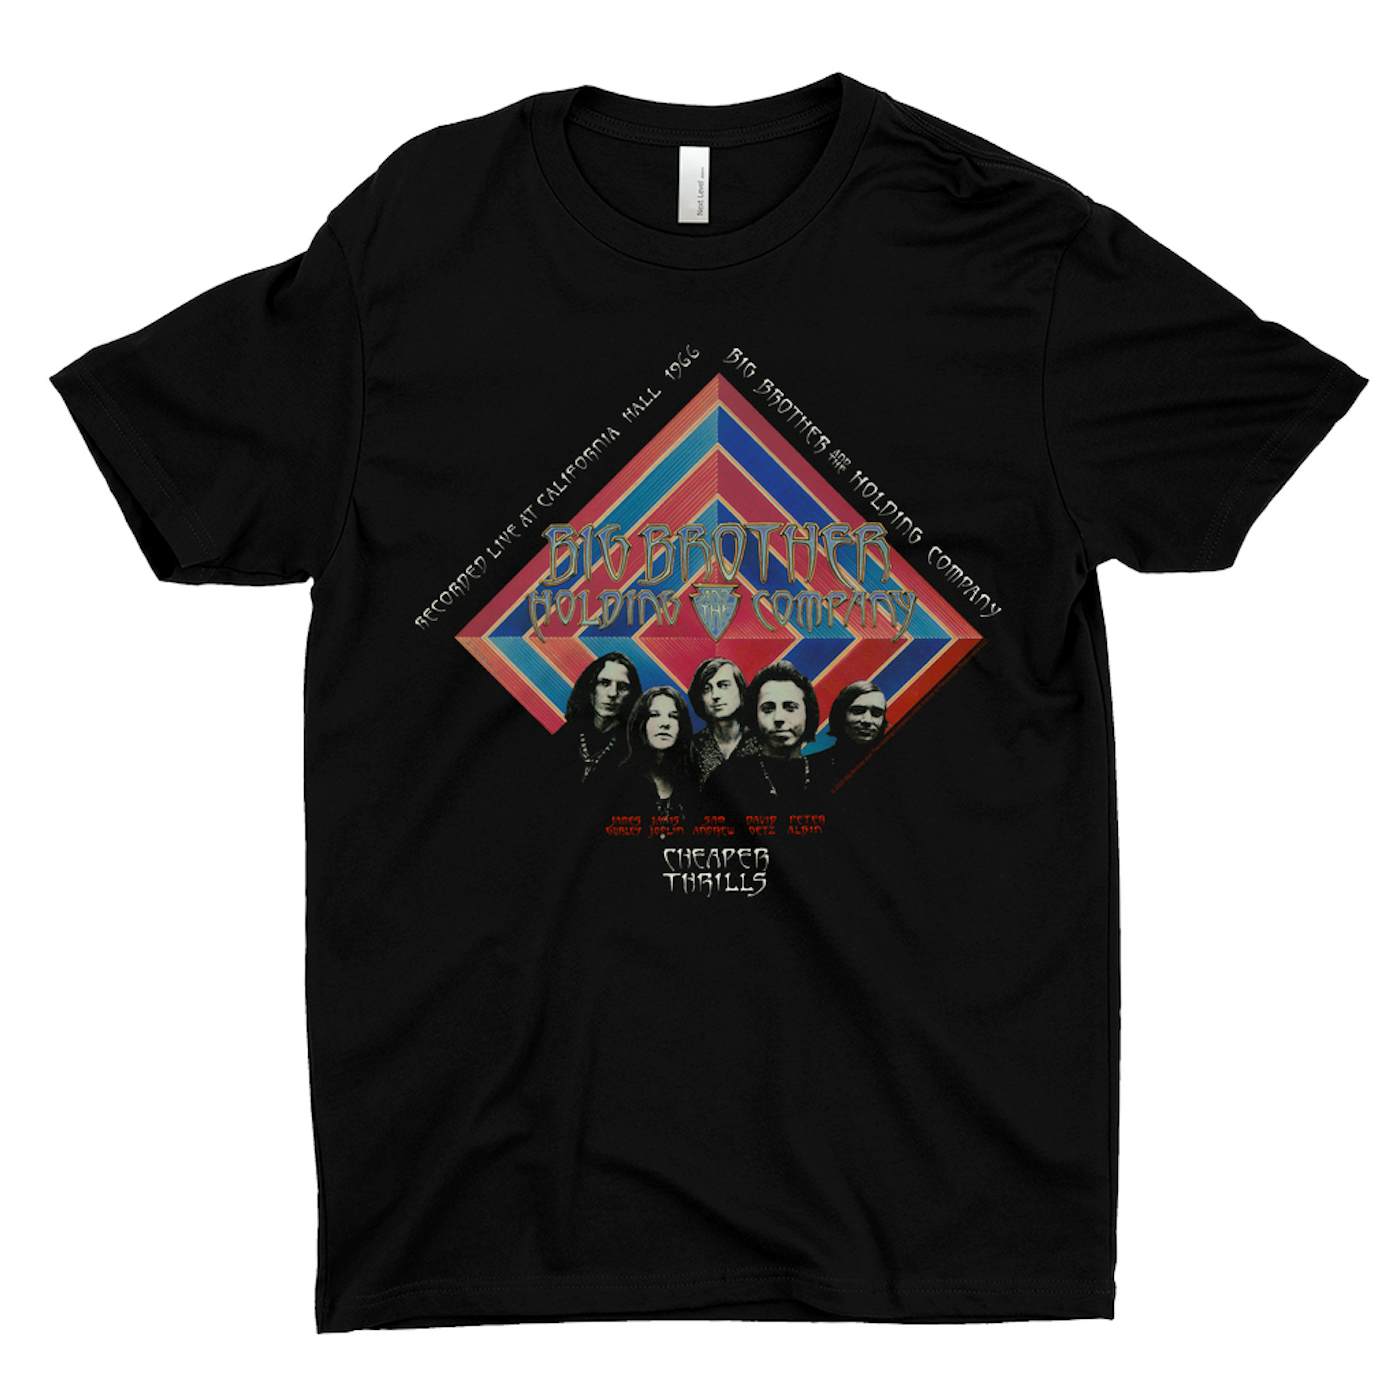 Big Brother & The Holding Company Big Brother and The Holding Co. T-Shirt | Cheaper Thrills Album Cover Big Brother and The Holding Co. Shirt